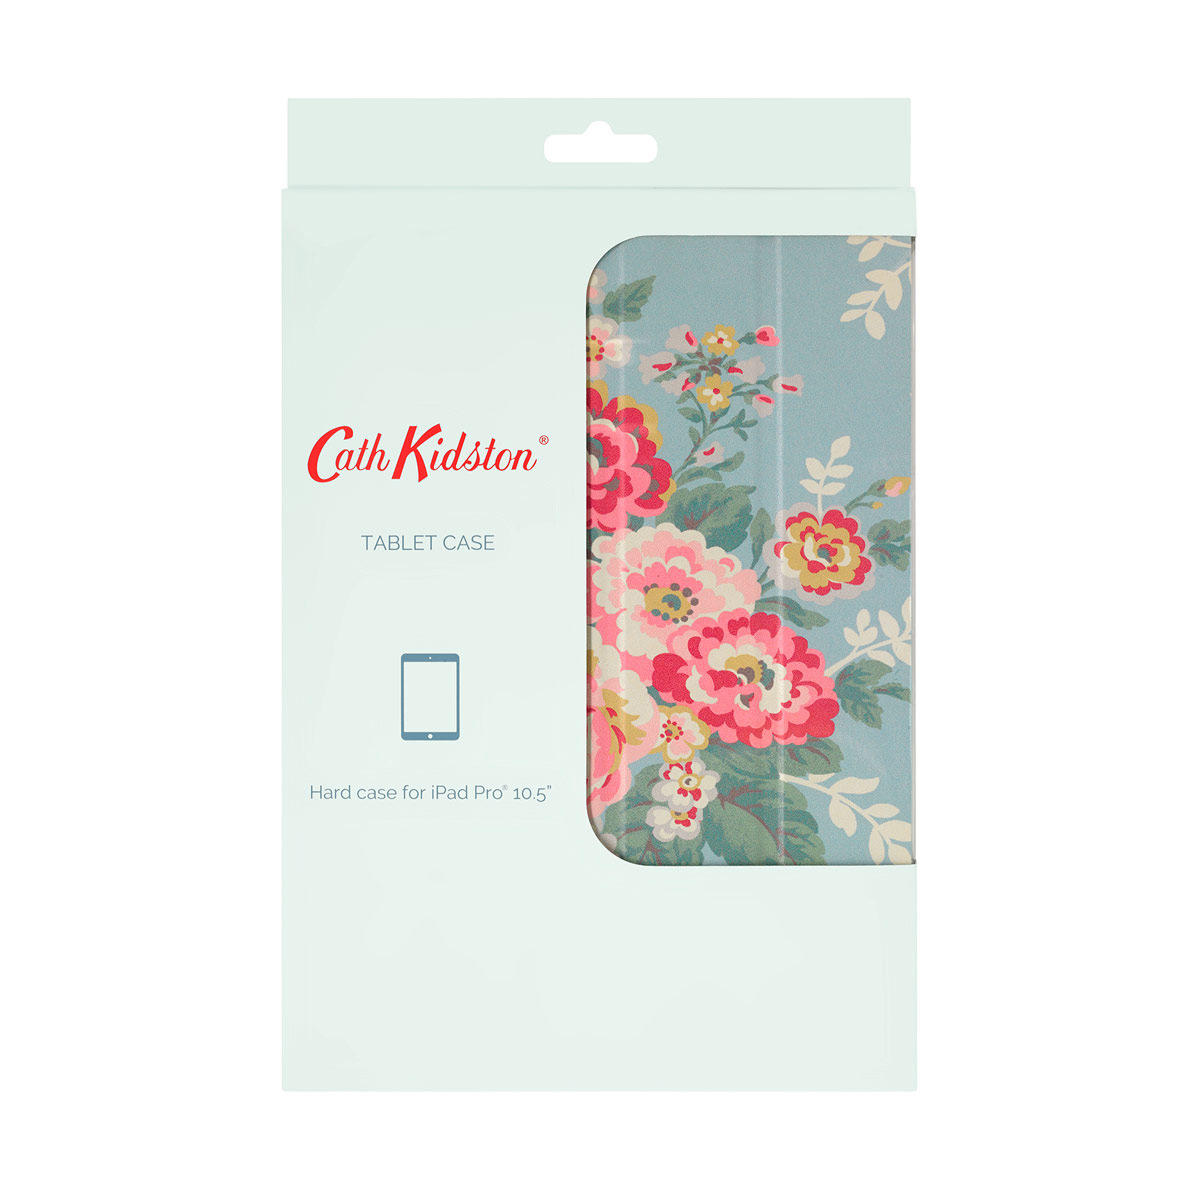 Cath Kidston Ipad Case - Candy Flowers 